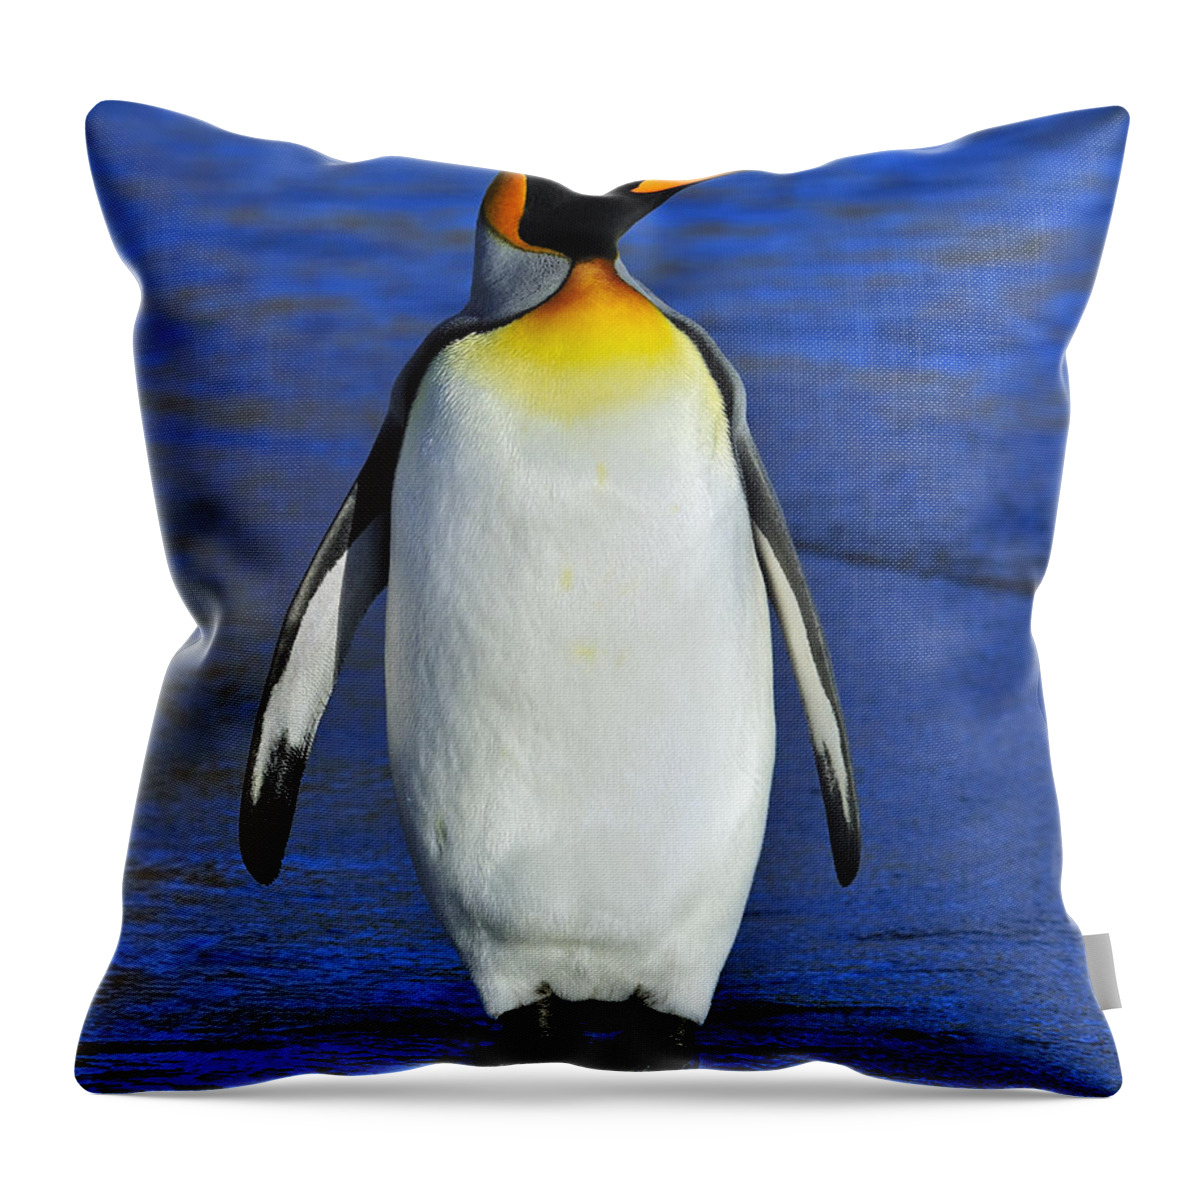 King Penguin Throw Pillow featuring the photograph Out Of Water by Tony Beck